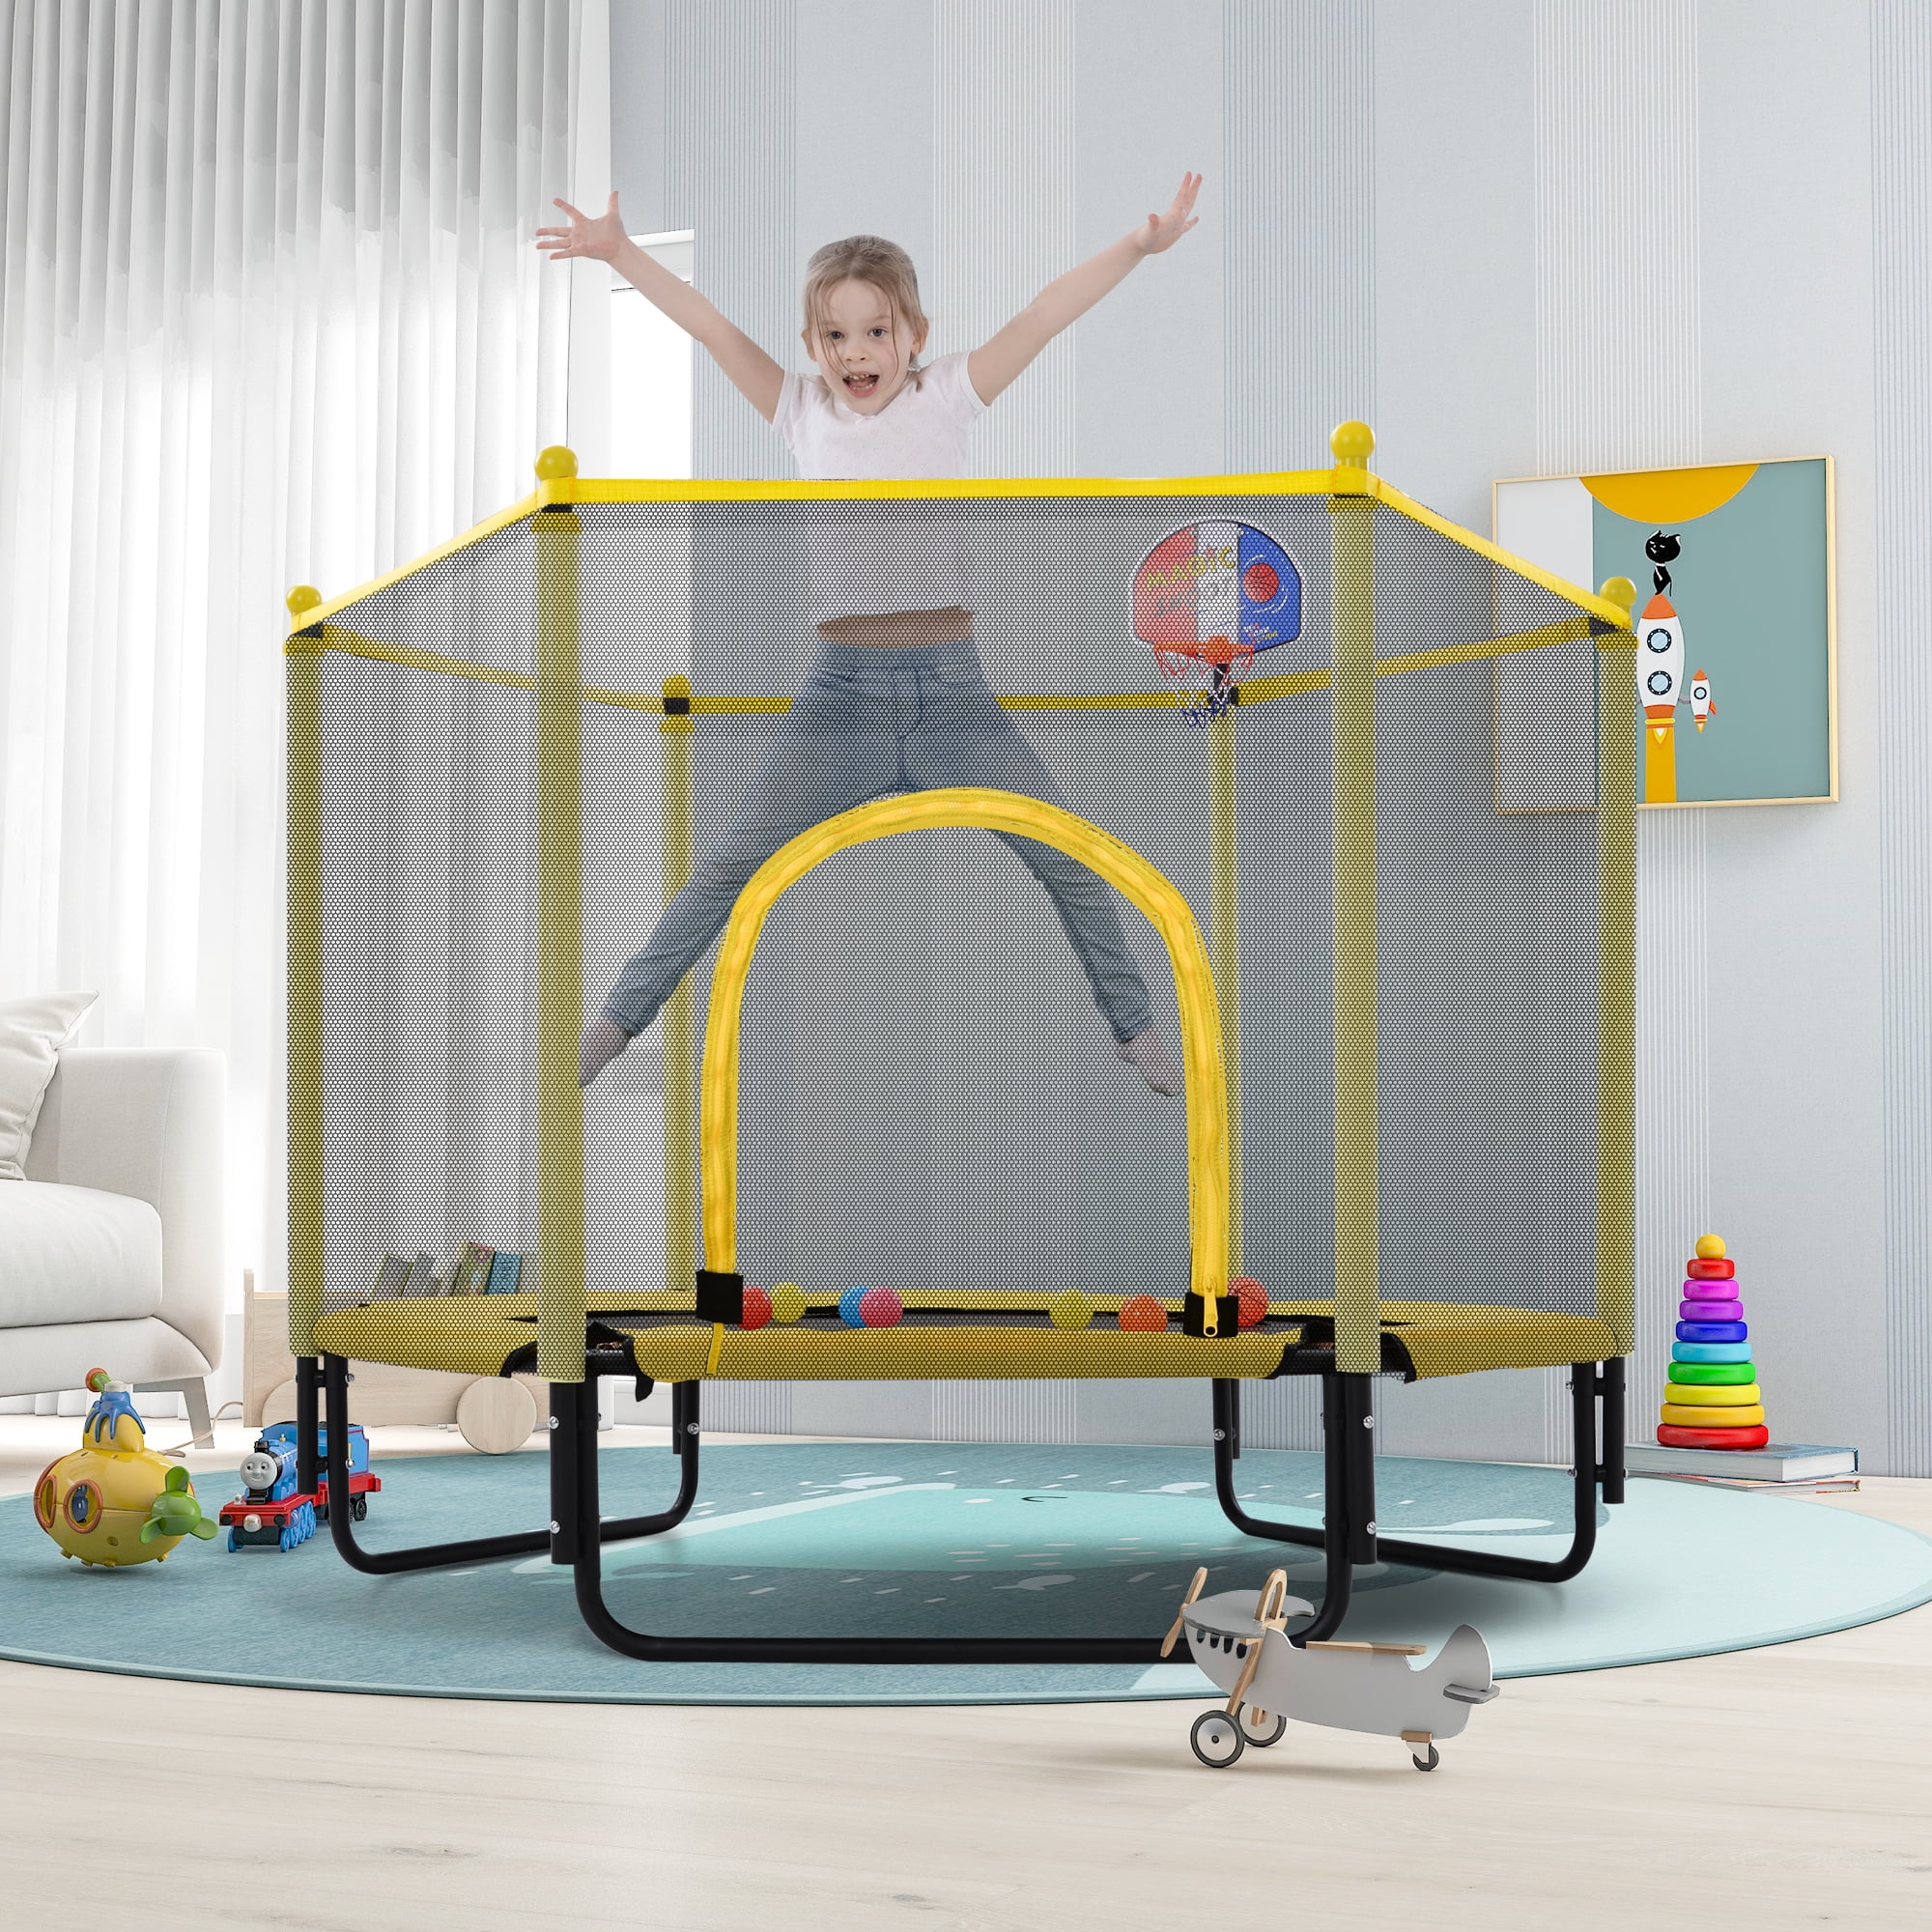 Piscis 5FT Trampoline with Safety Enclosure for Kids, Indoor Outdoor Mini Toddler Trampoline with Basketball Hoop, Birthday Gifts Toys for Boys Girls, Yellow